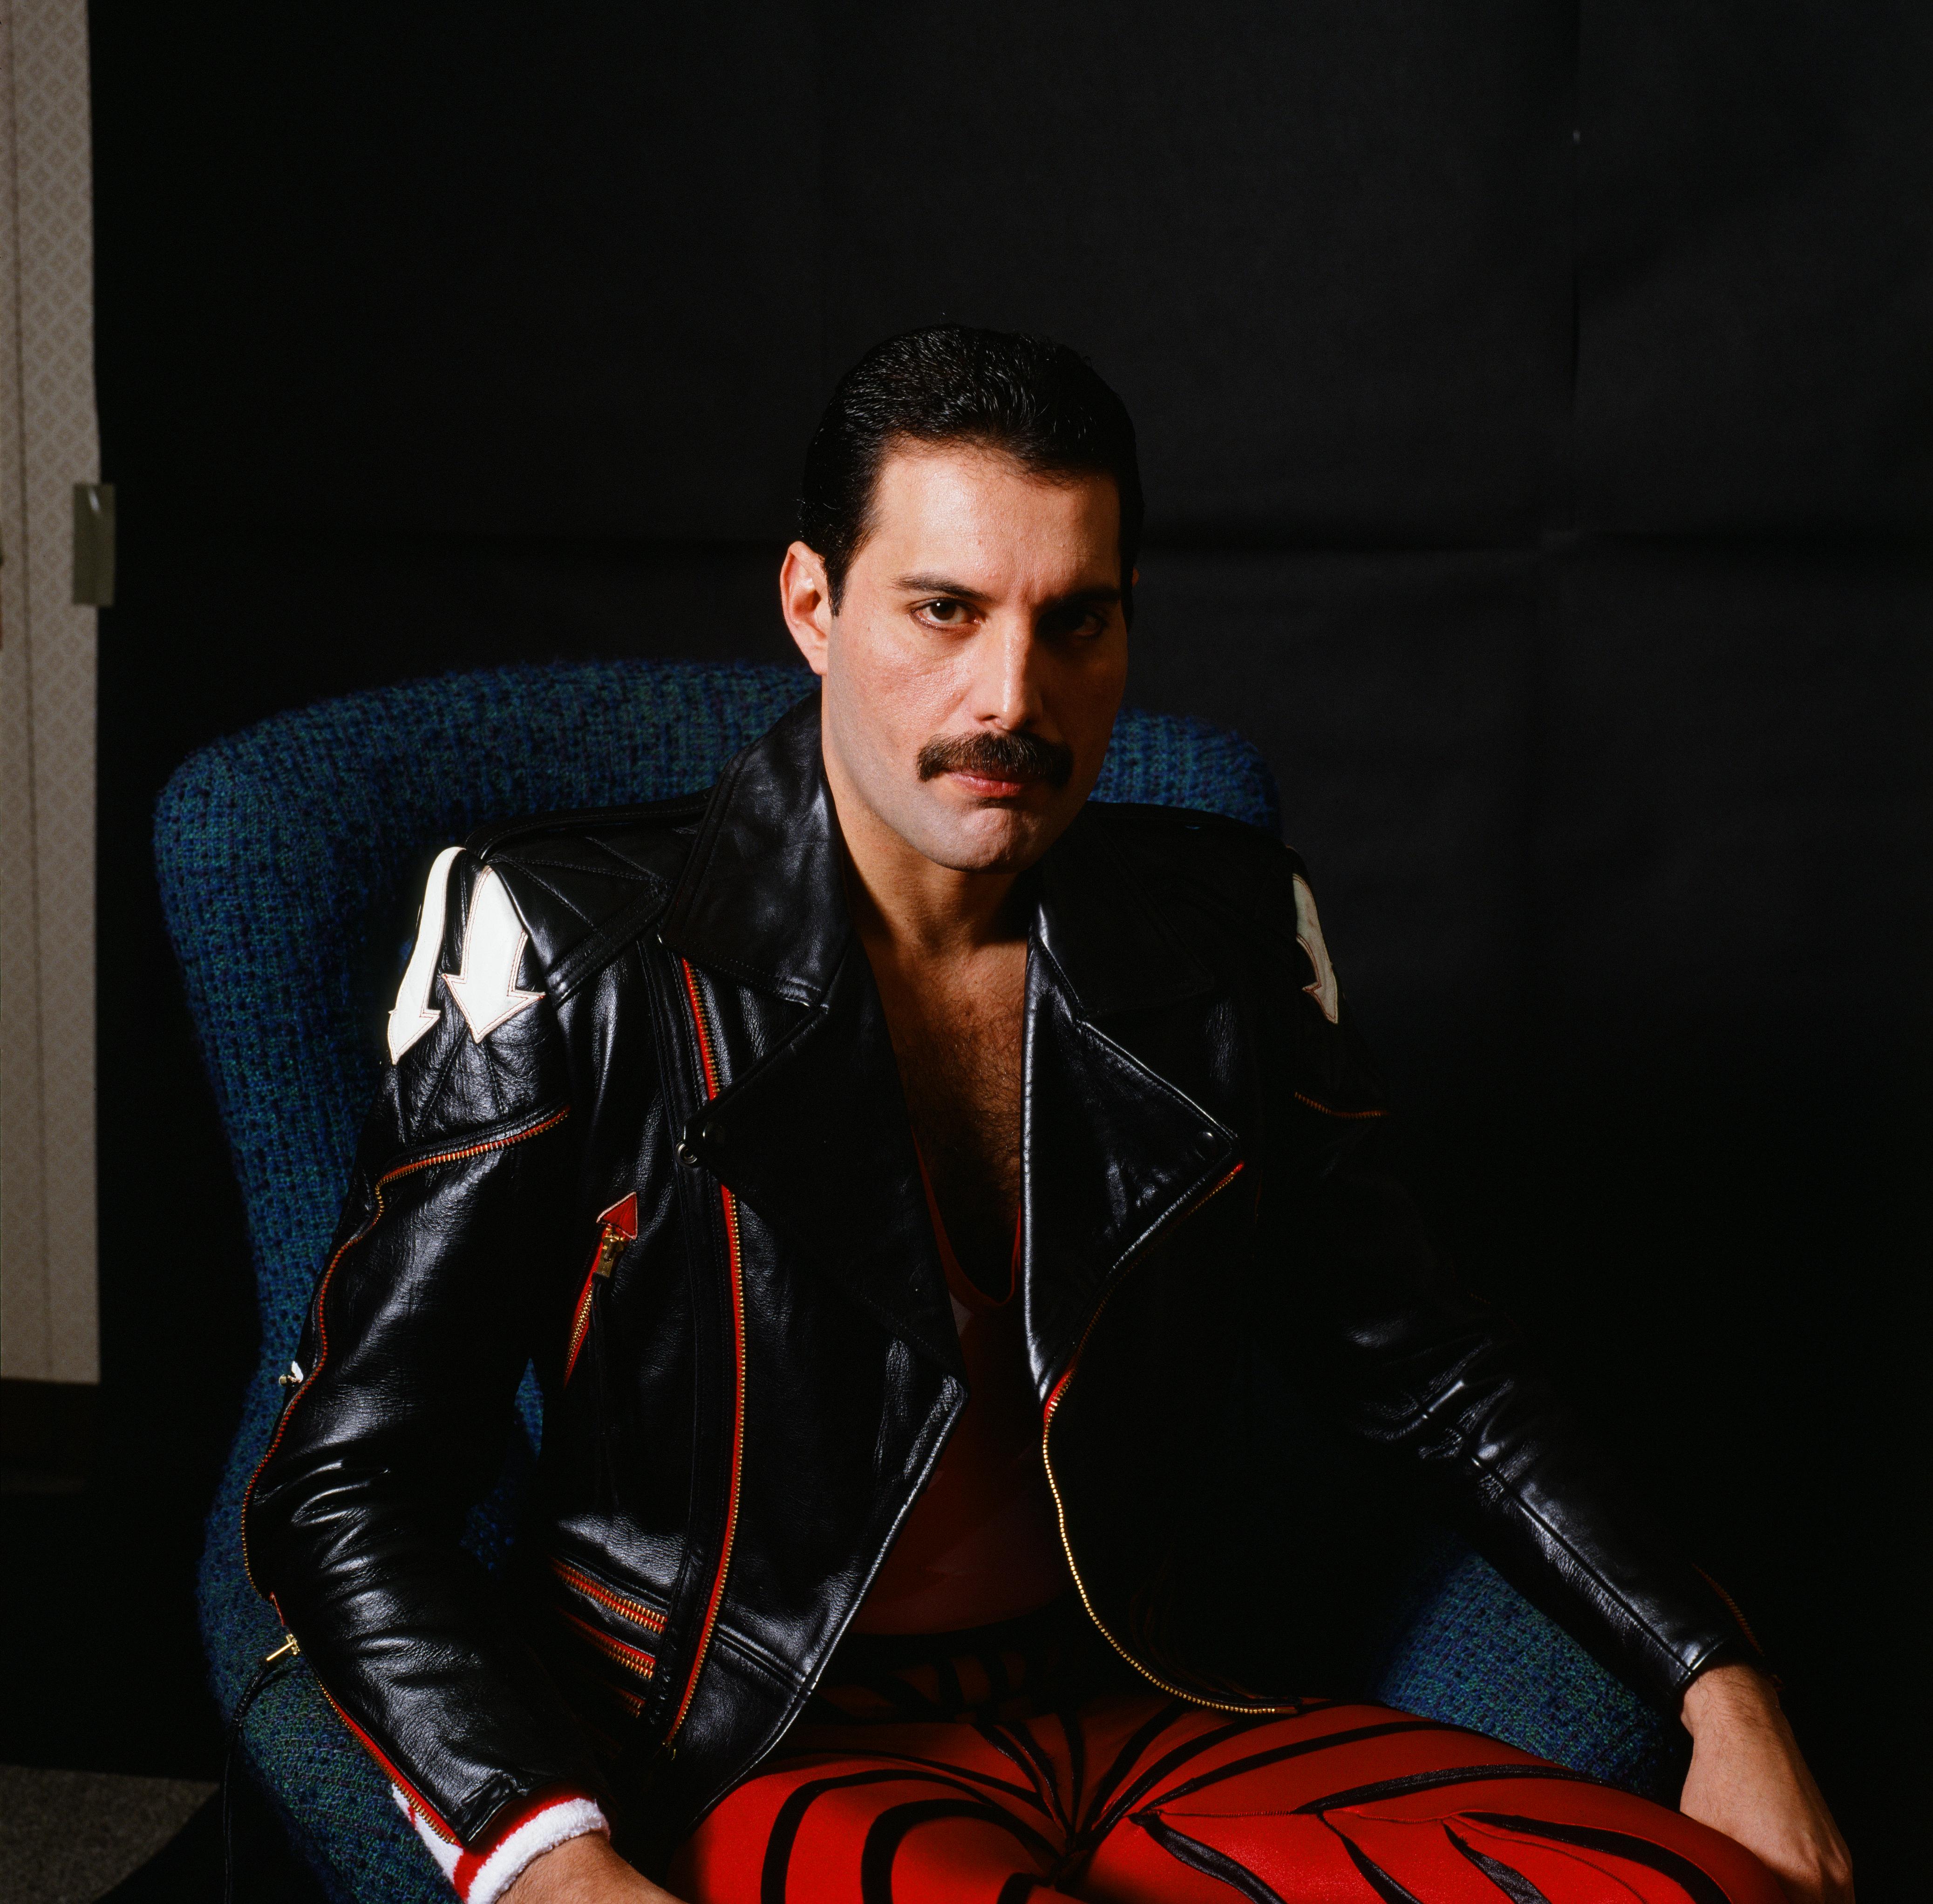 Freddie Mercury of Queen, portrait for Japanese music magazine 'Music Life', Tokyo, Japan , 1985. | Source: Getty Images.